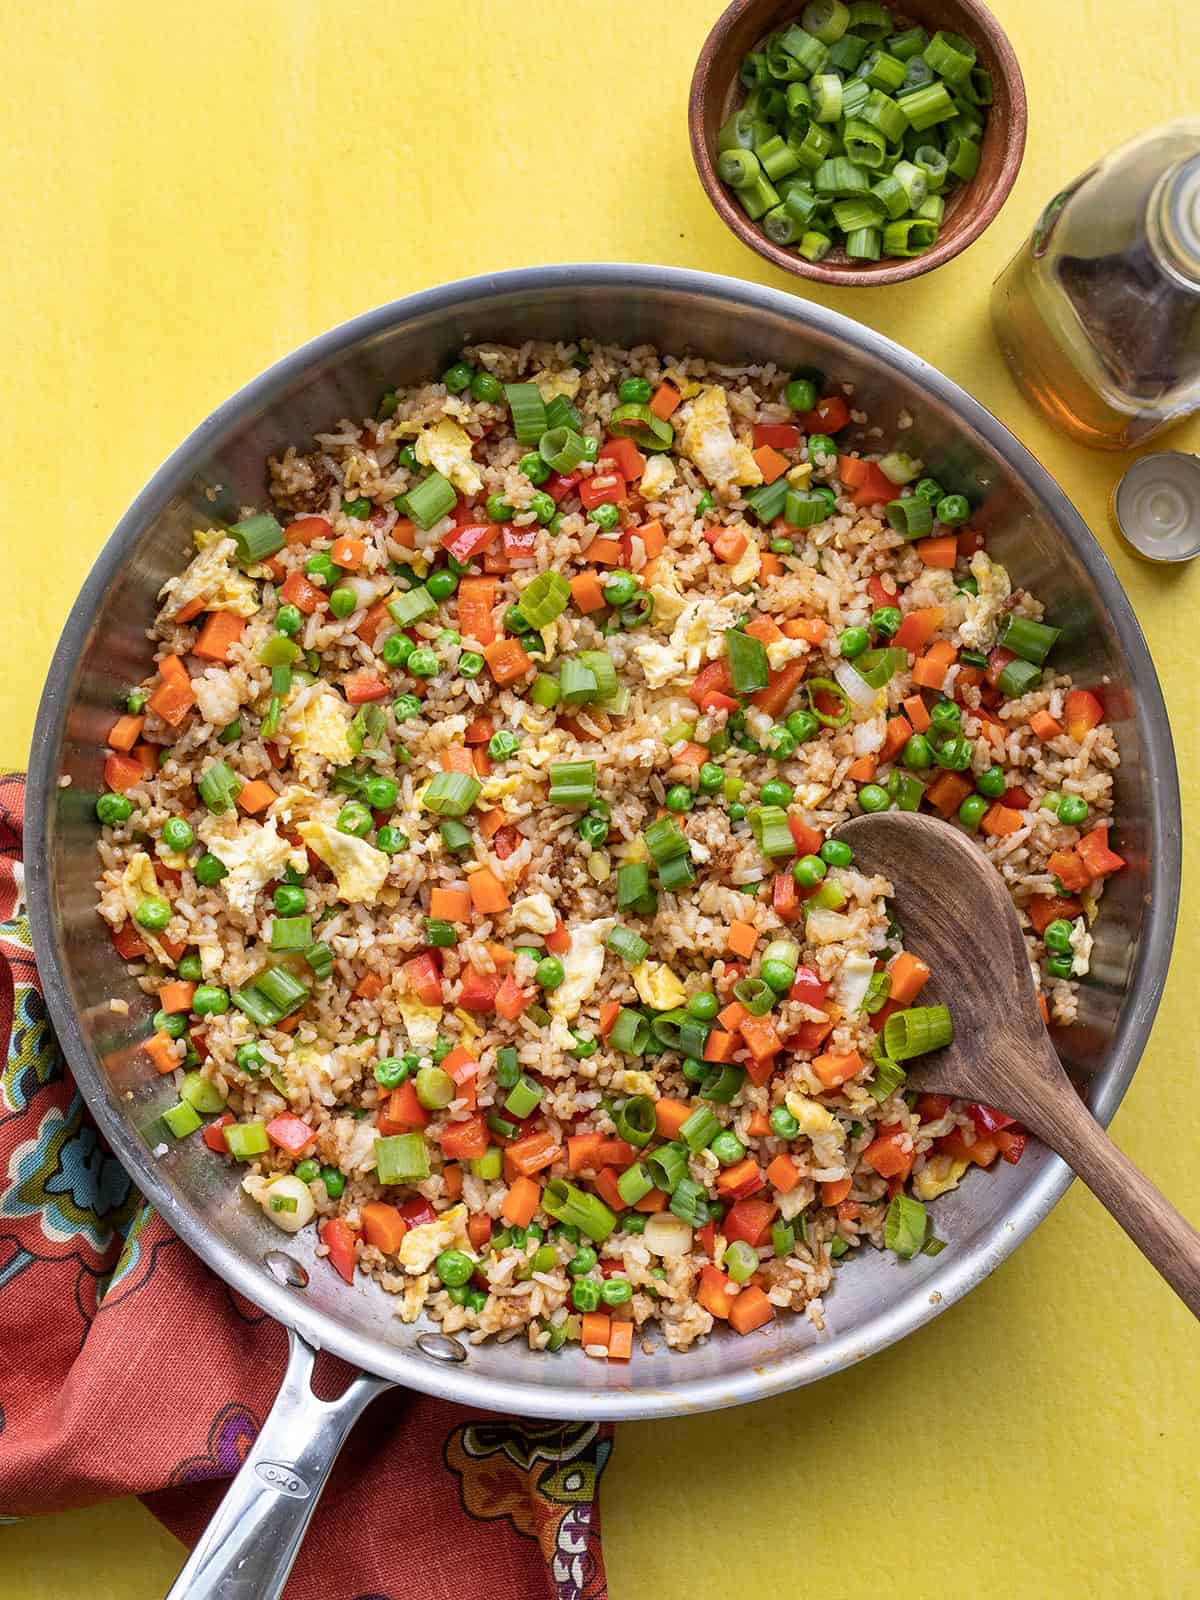 finished vegetable fried rice in a skillet against a yellow background.